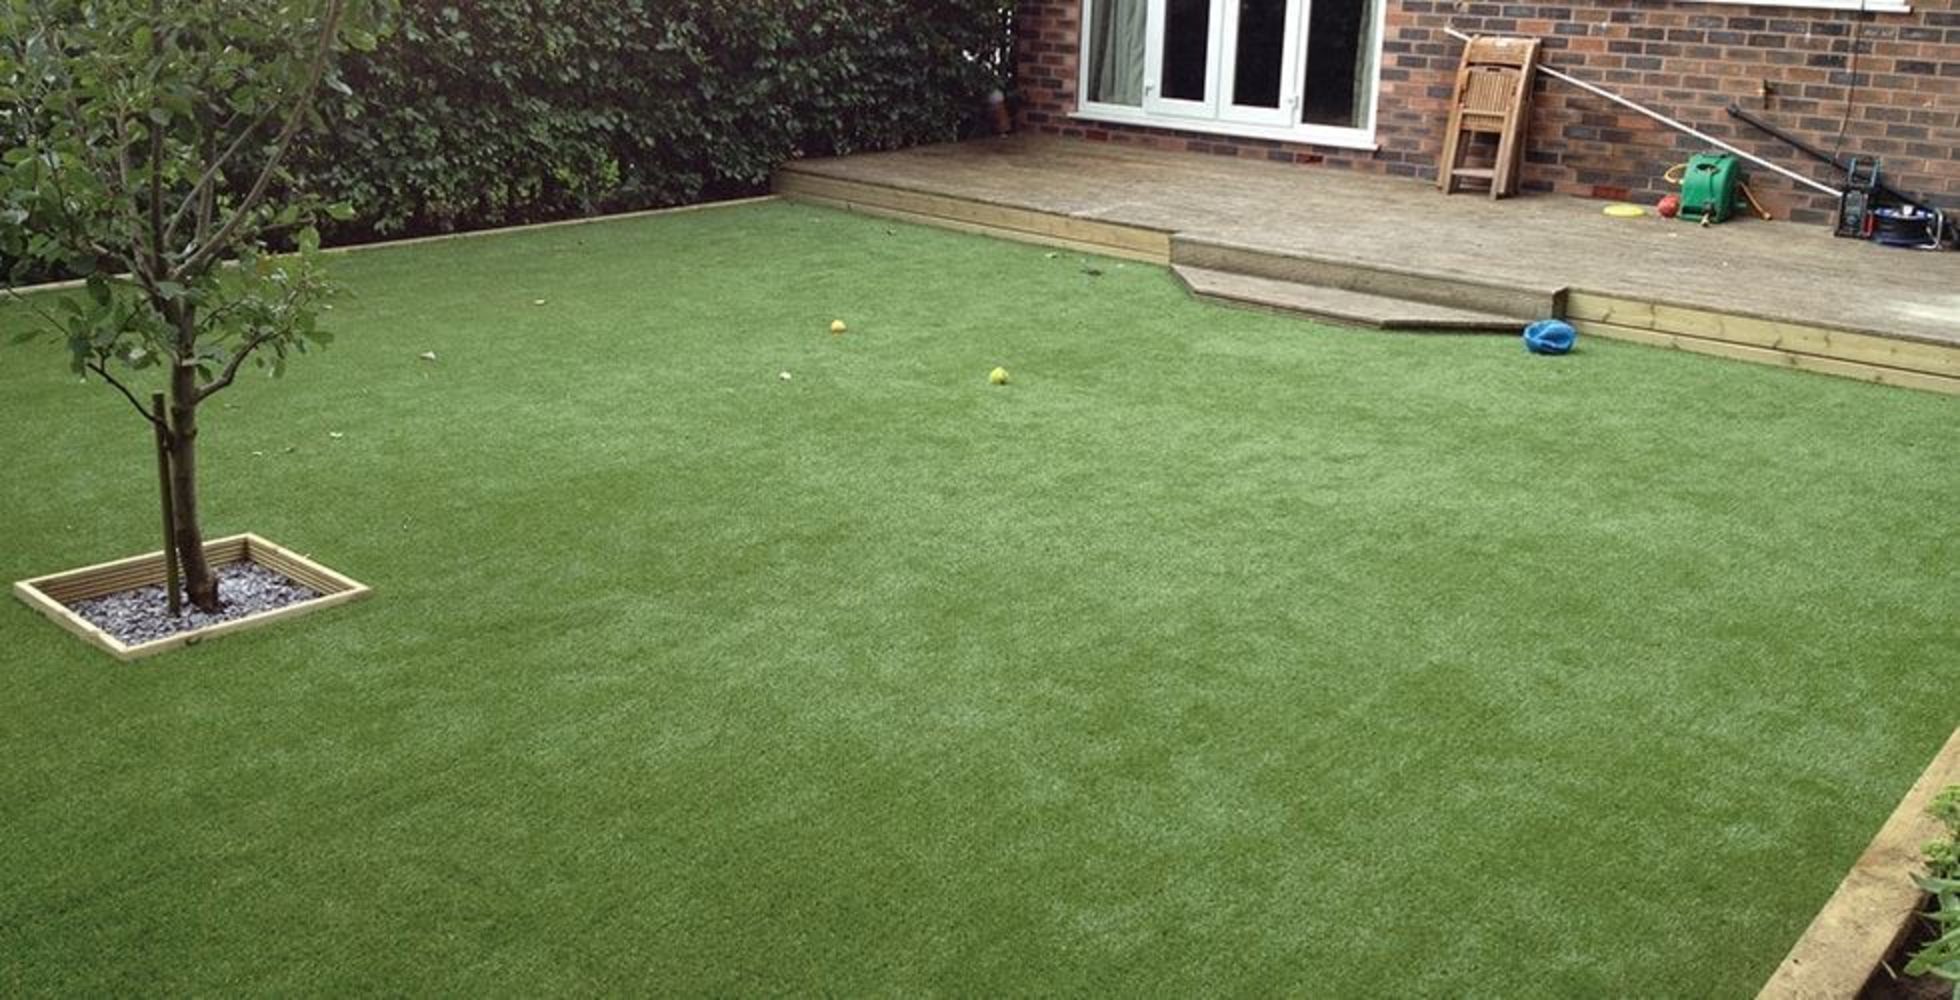 Playrite Nearlygrass Premium Astro-Turf | SHIPPING AVAILABLE